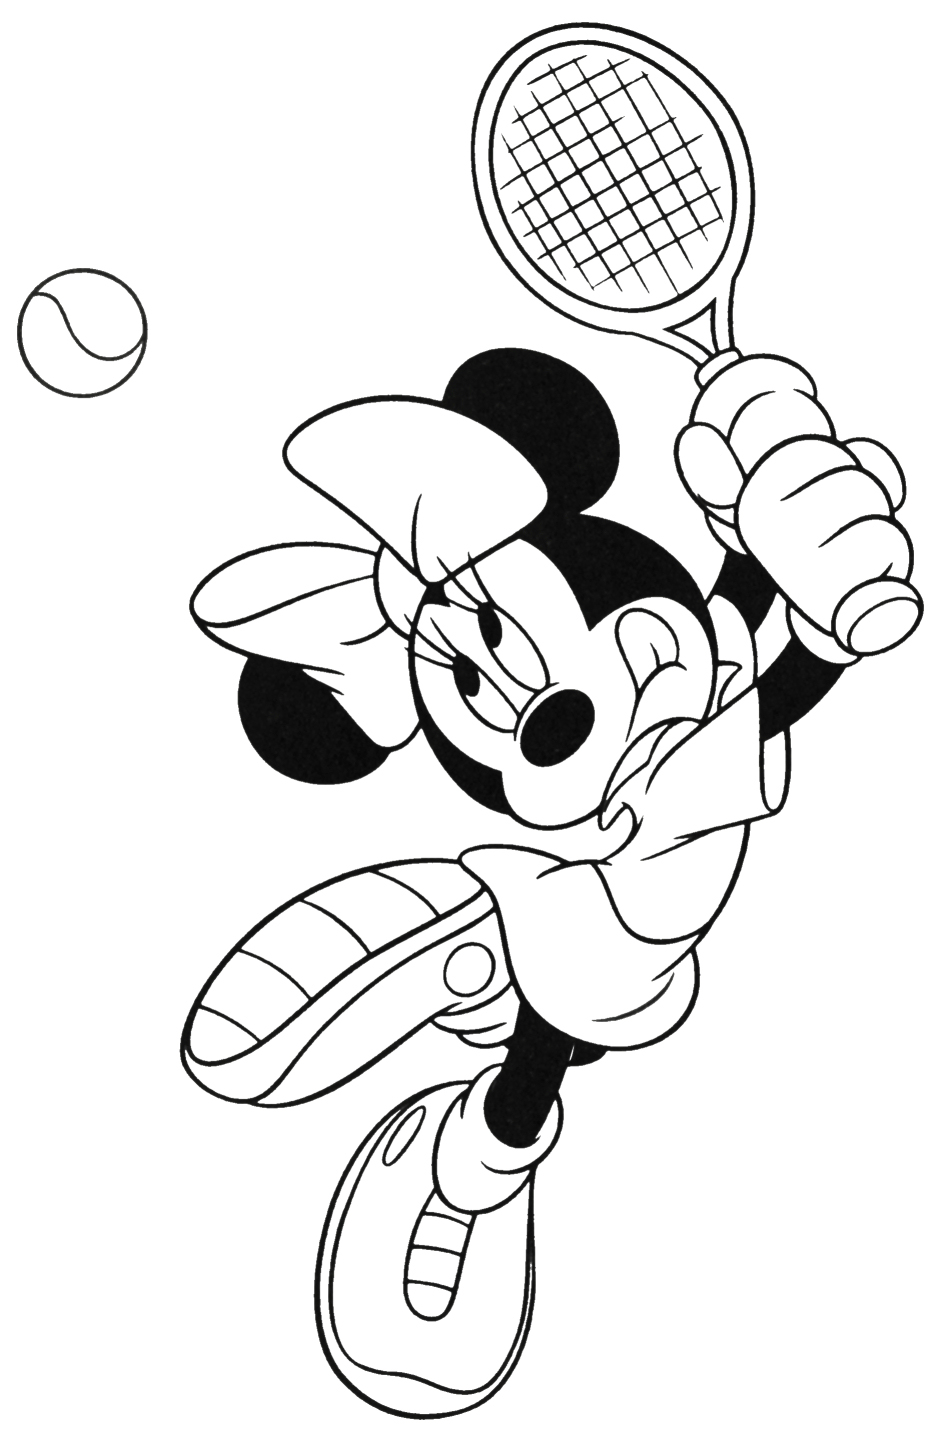 Minnie Mouse is Good at Tennis